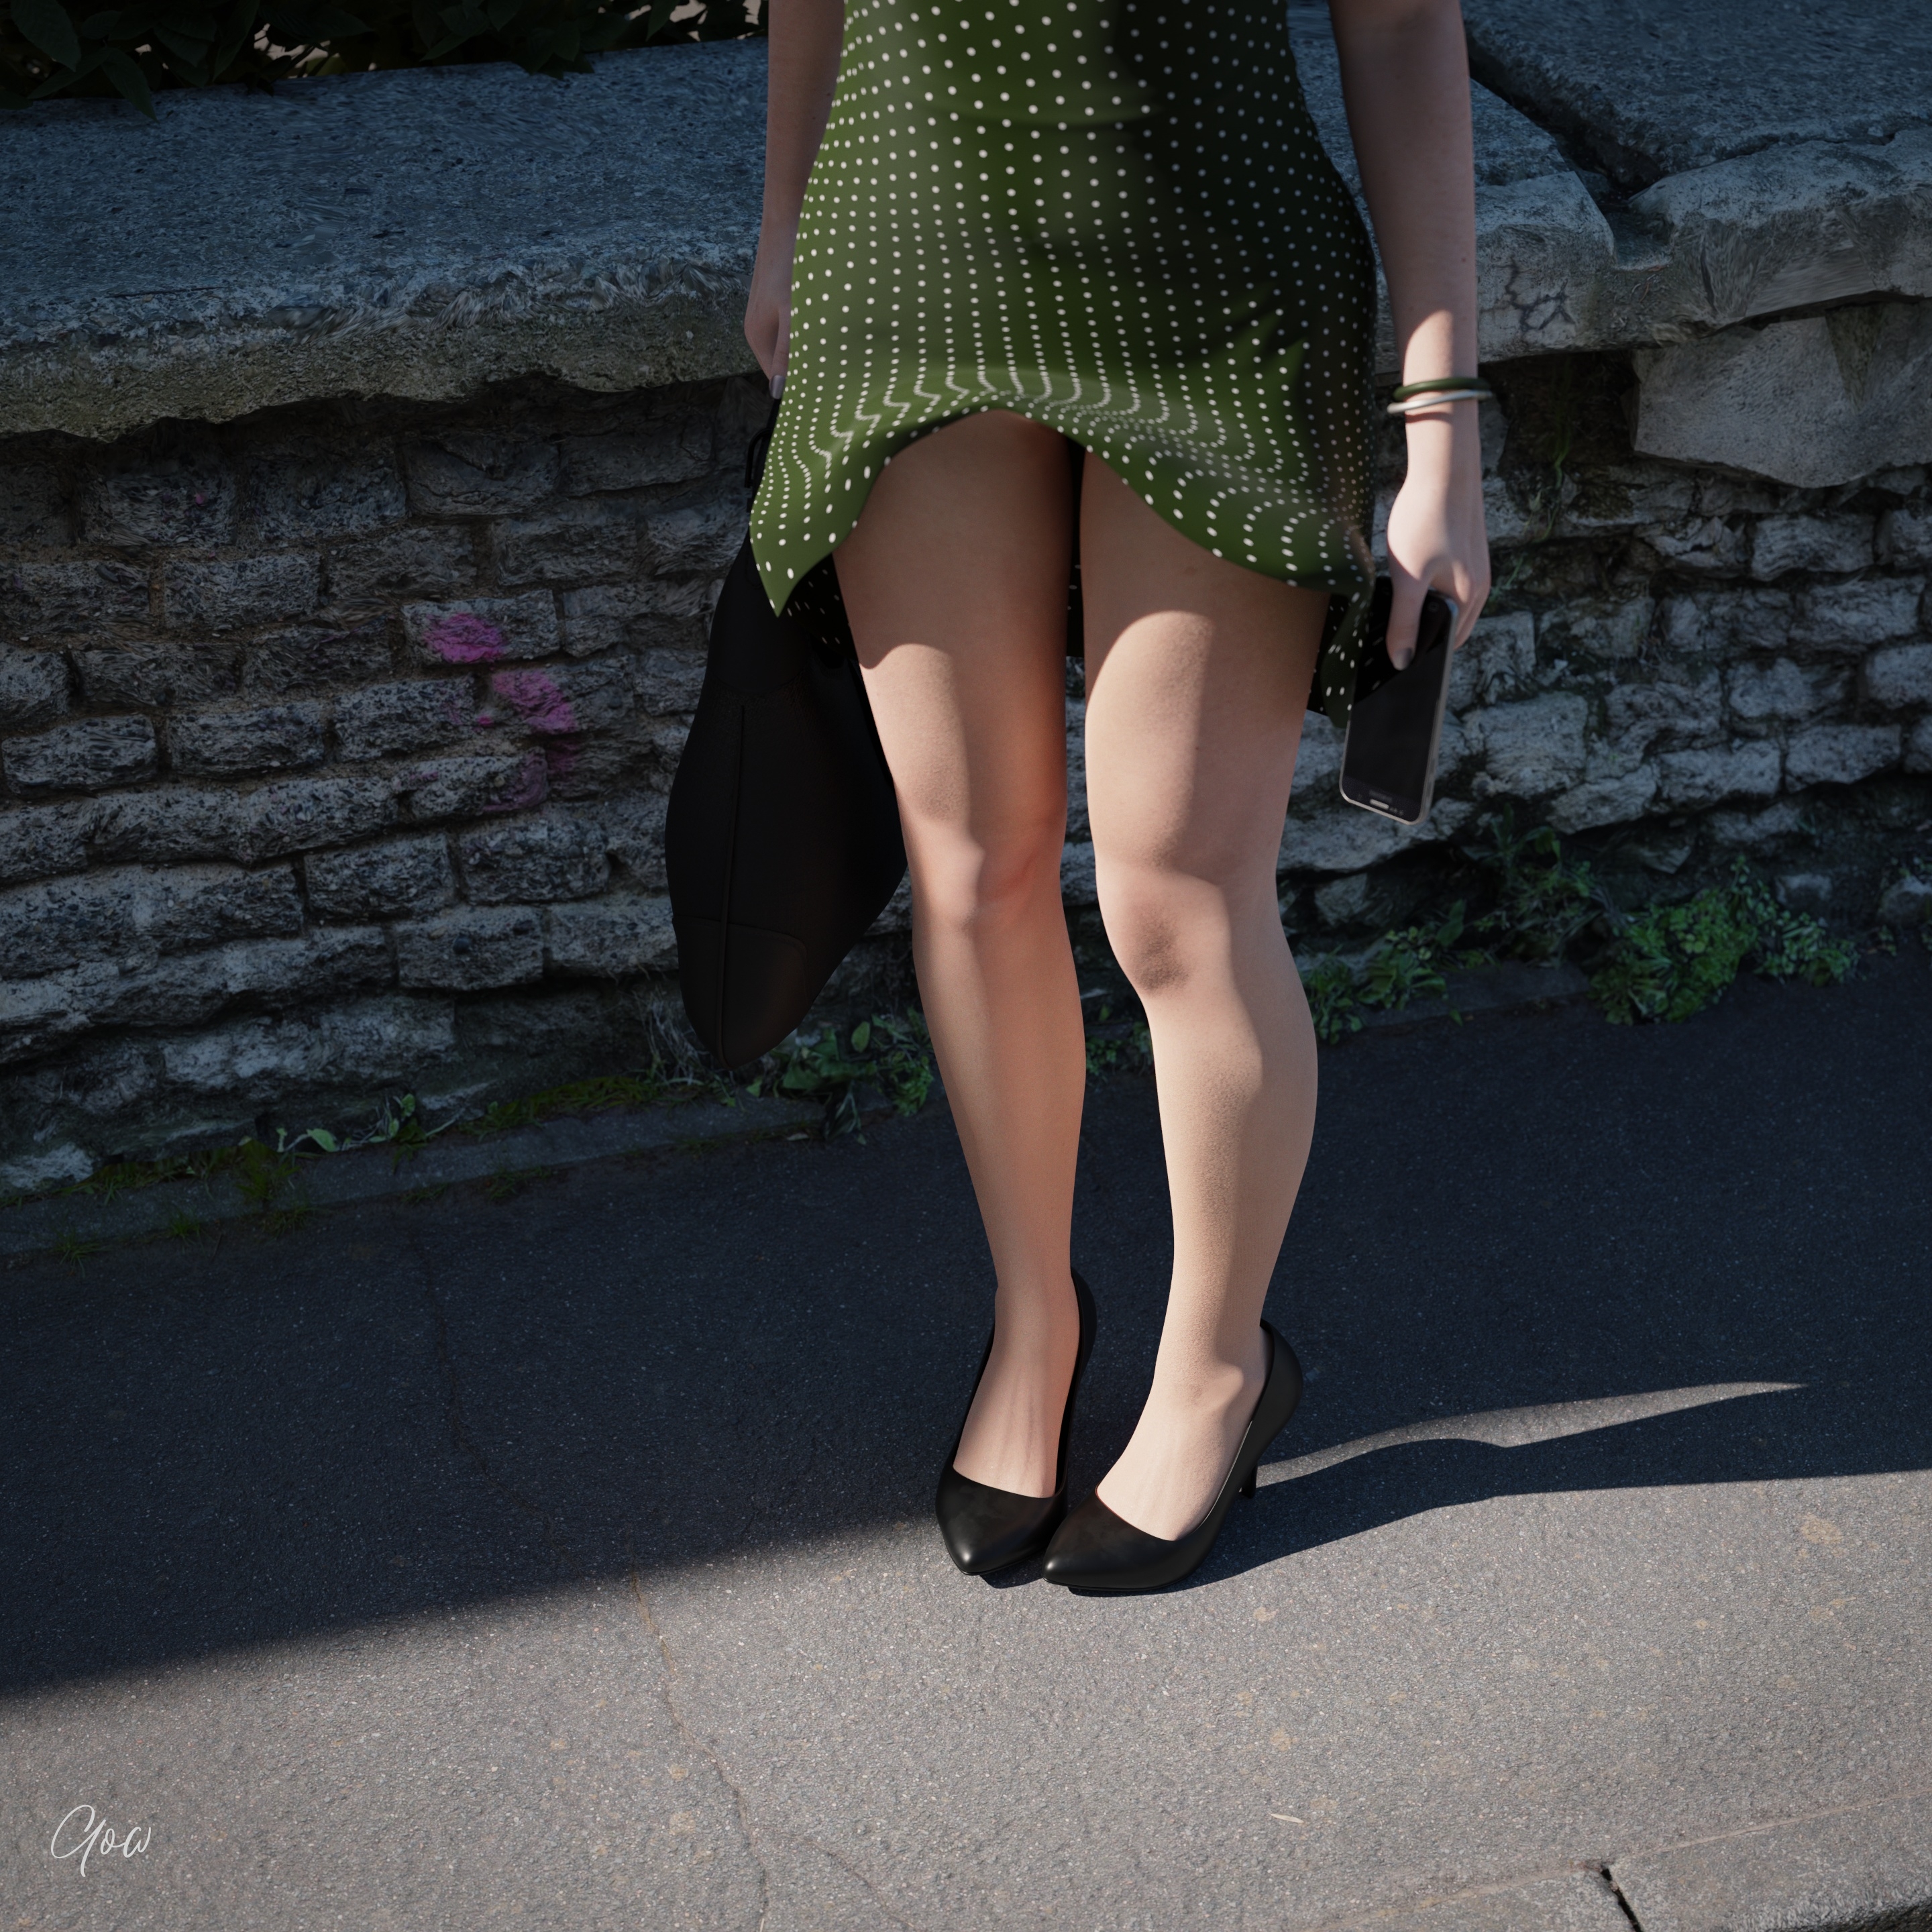 Dotted green and the wind - PT1 White Outdoor Lady Secretary Photoshoot Clothed Skirt Upskirt Pussy Wet Pussy Legs Sexy Sexyhot Photorealistic No Panties High Heels Hairy Pussy Party Dress Milf Natural Boobs Natural Tits 11